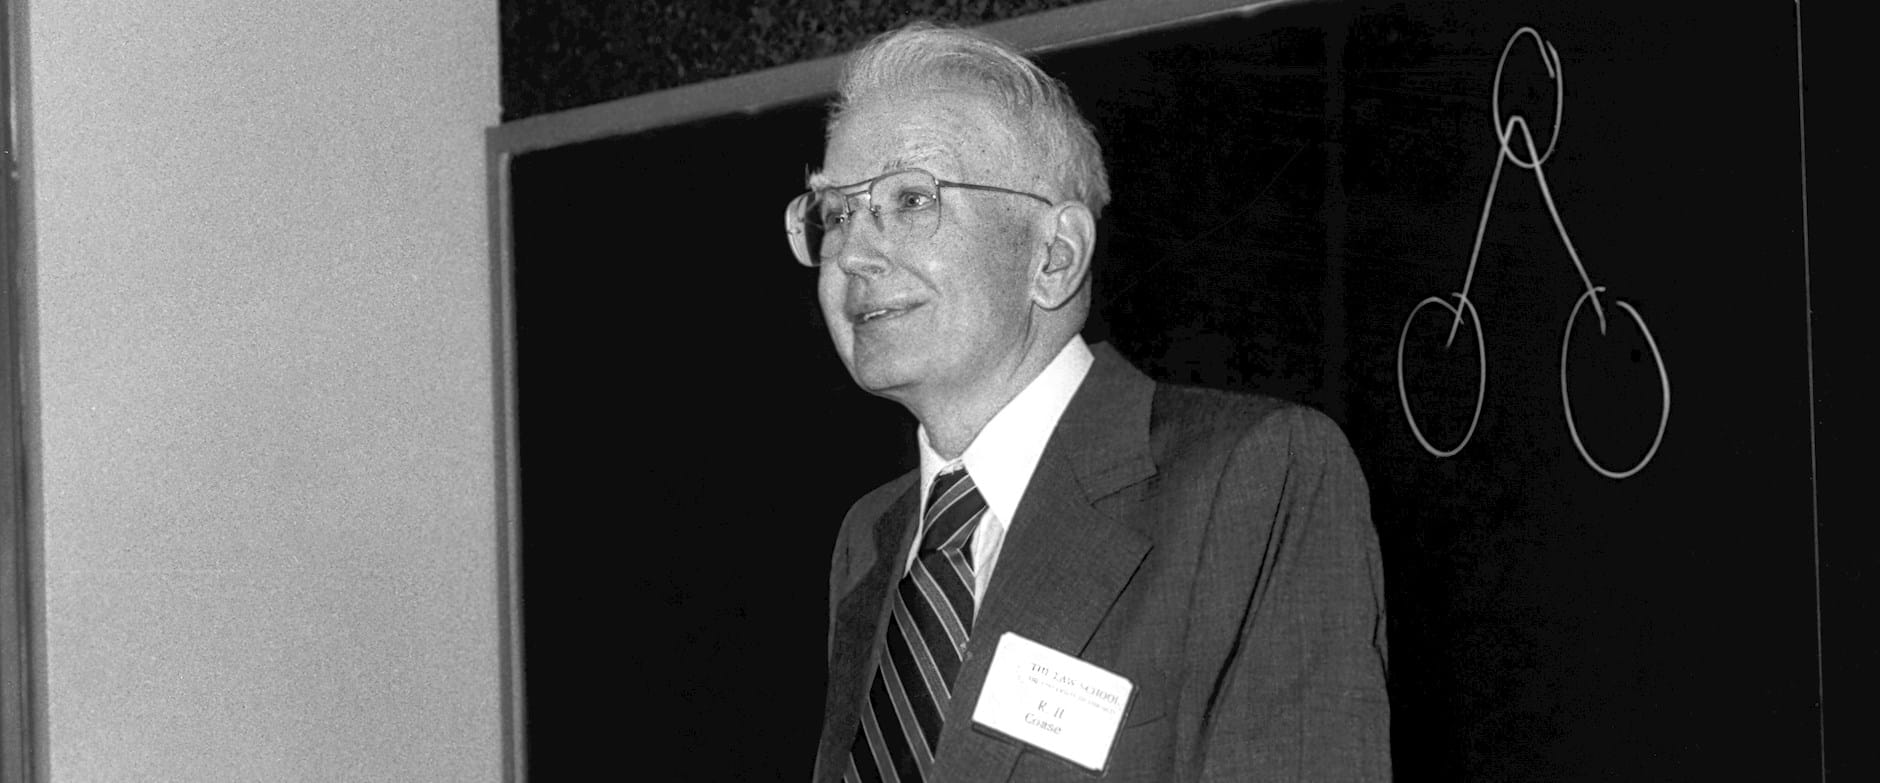 Ronald Coase standing in front of a blackboard